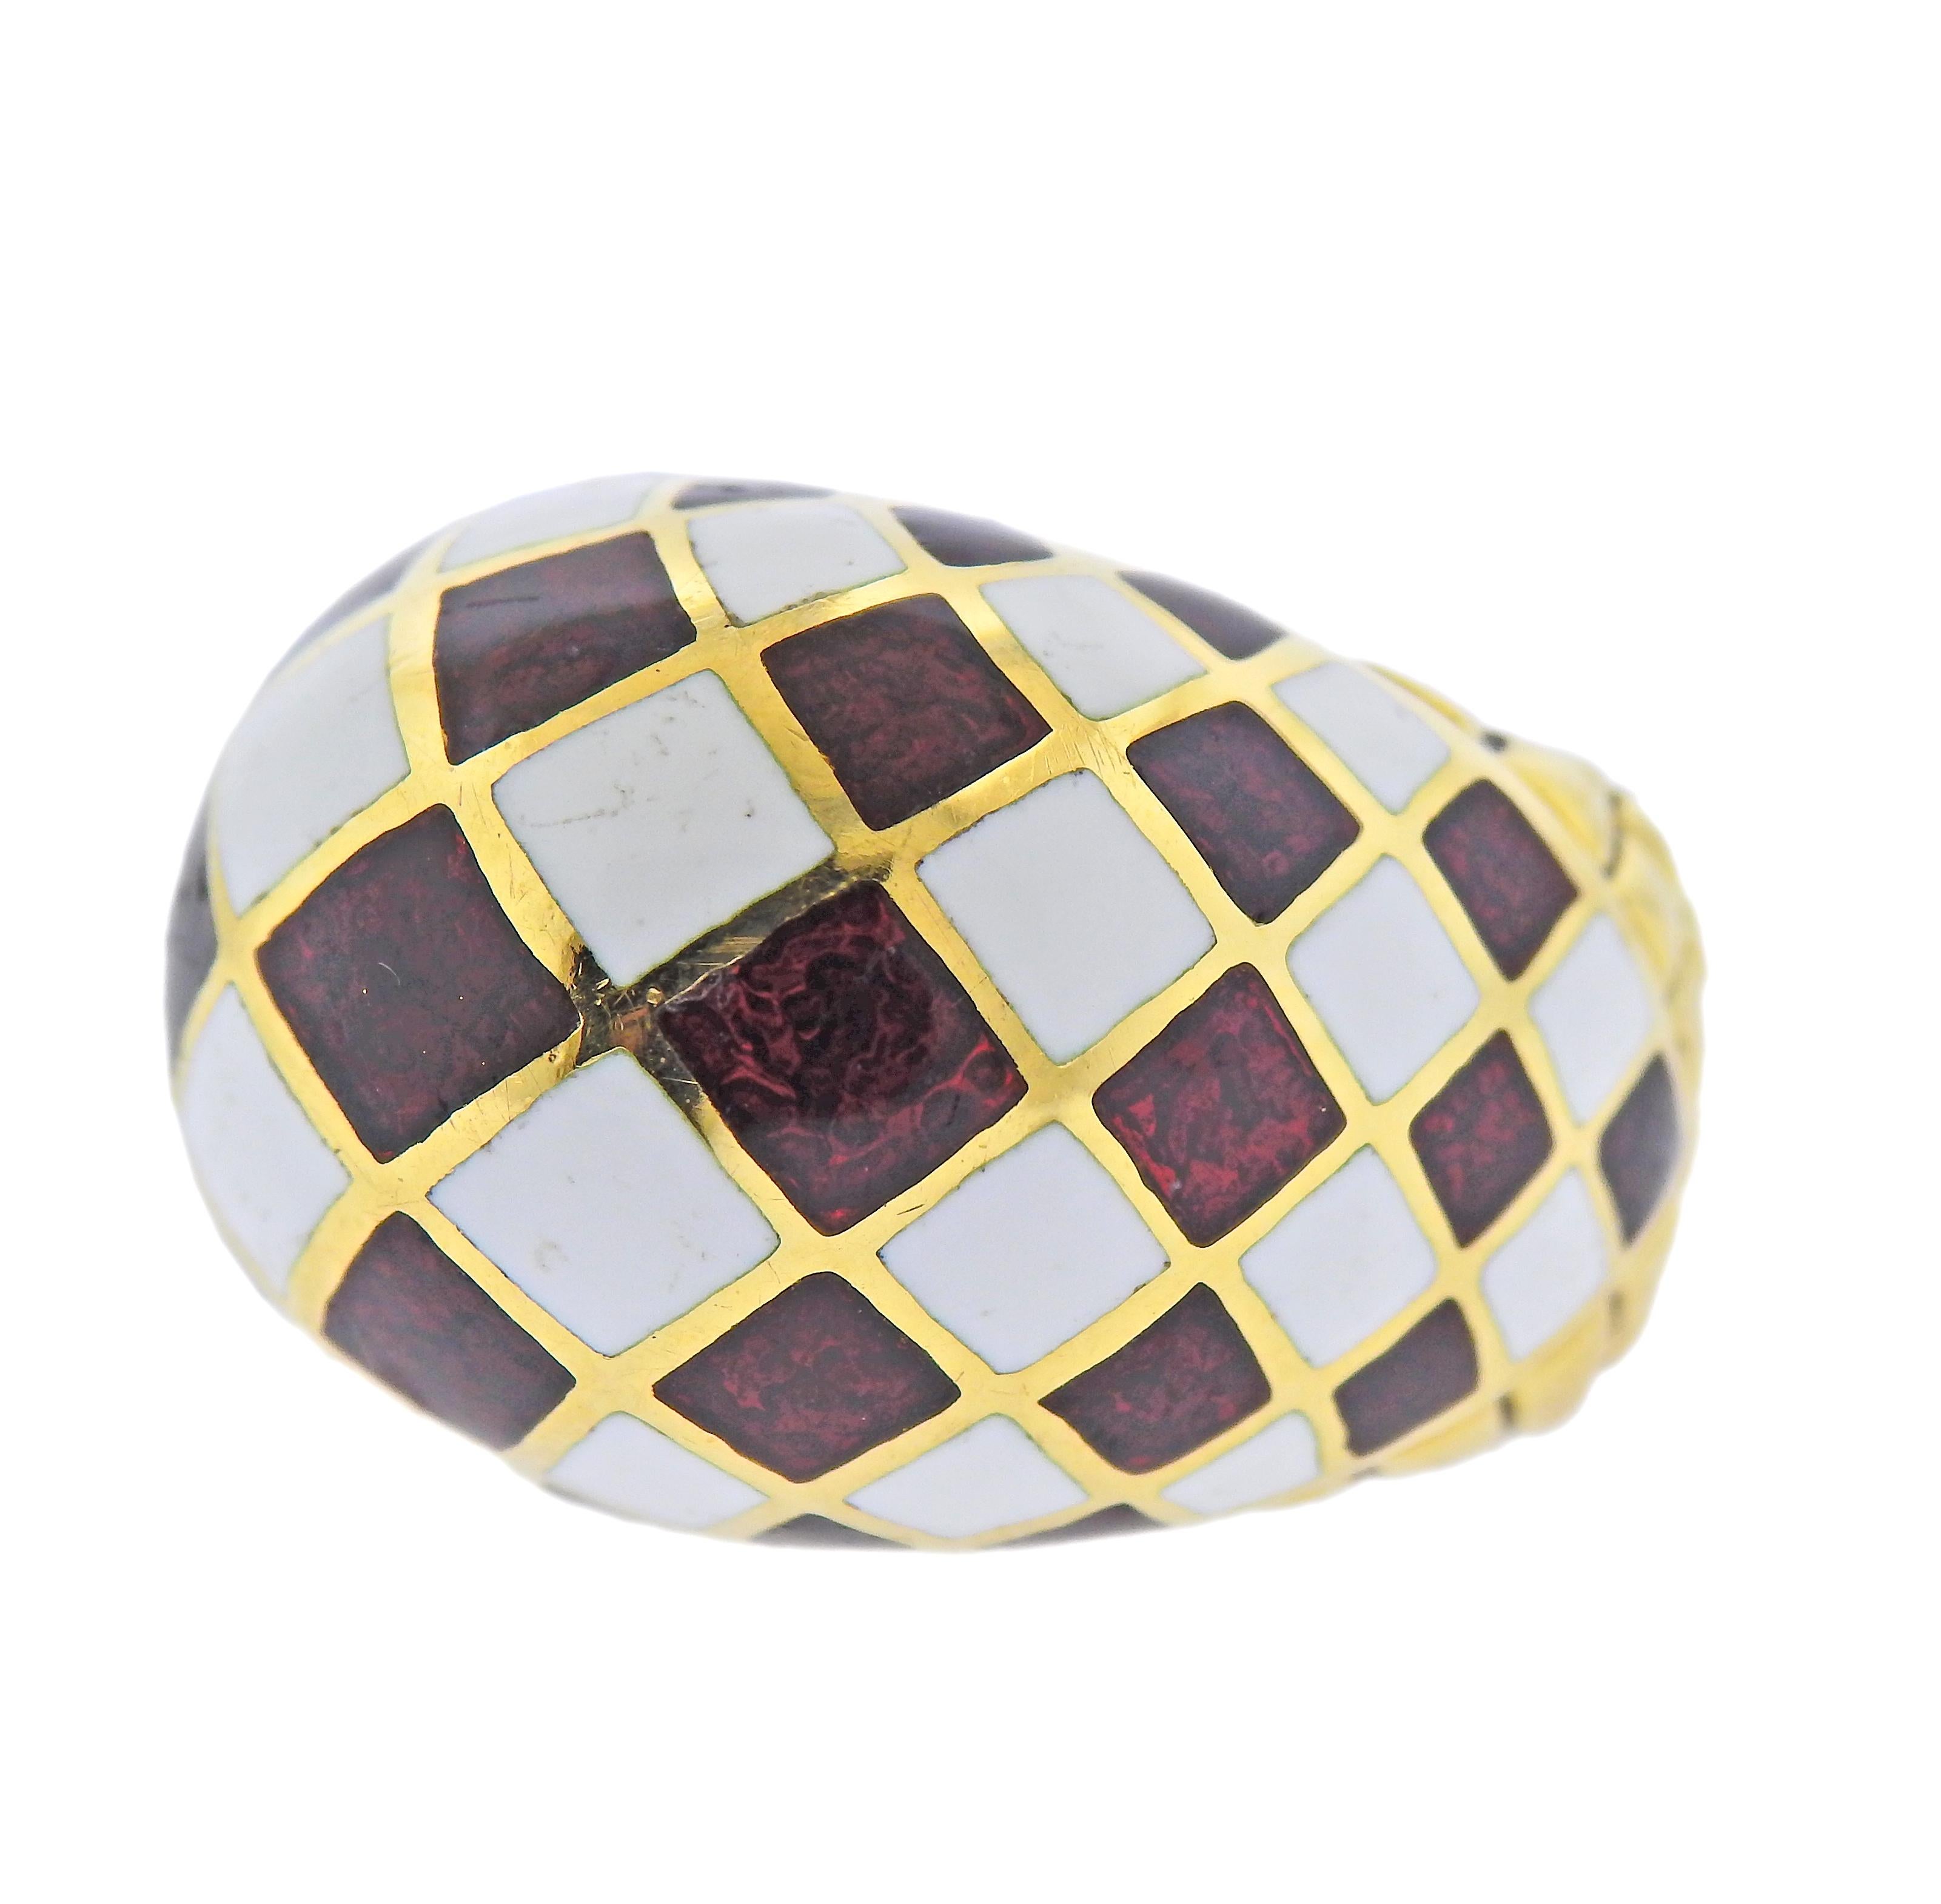 David Webb 18k gold dome ring, decorated with checkered pattern maroon red and white enamel. Ring size - 5, ring top - 20mm wide. Sits approx. 14mm from the finger, when worn. Marked:  Webb 18k. Weight - 25.1 grams.